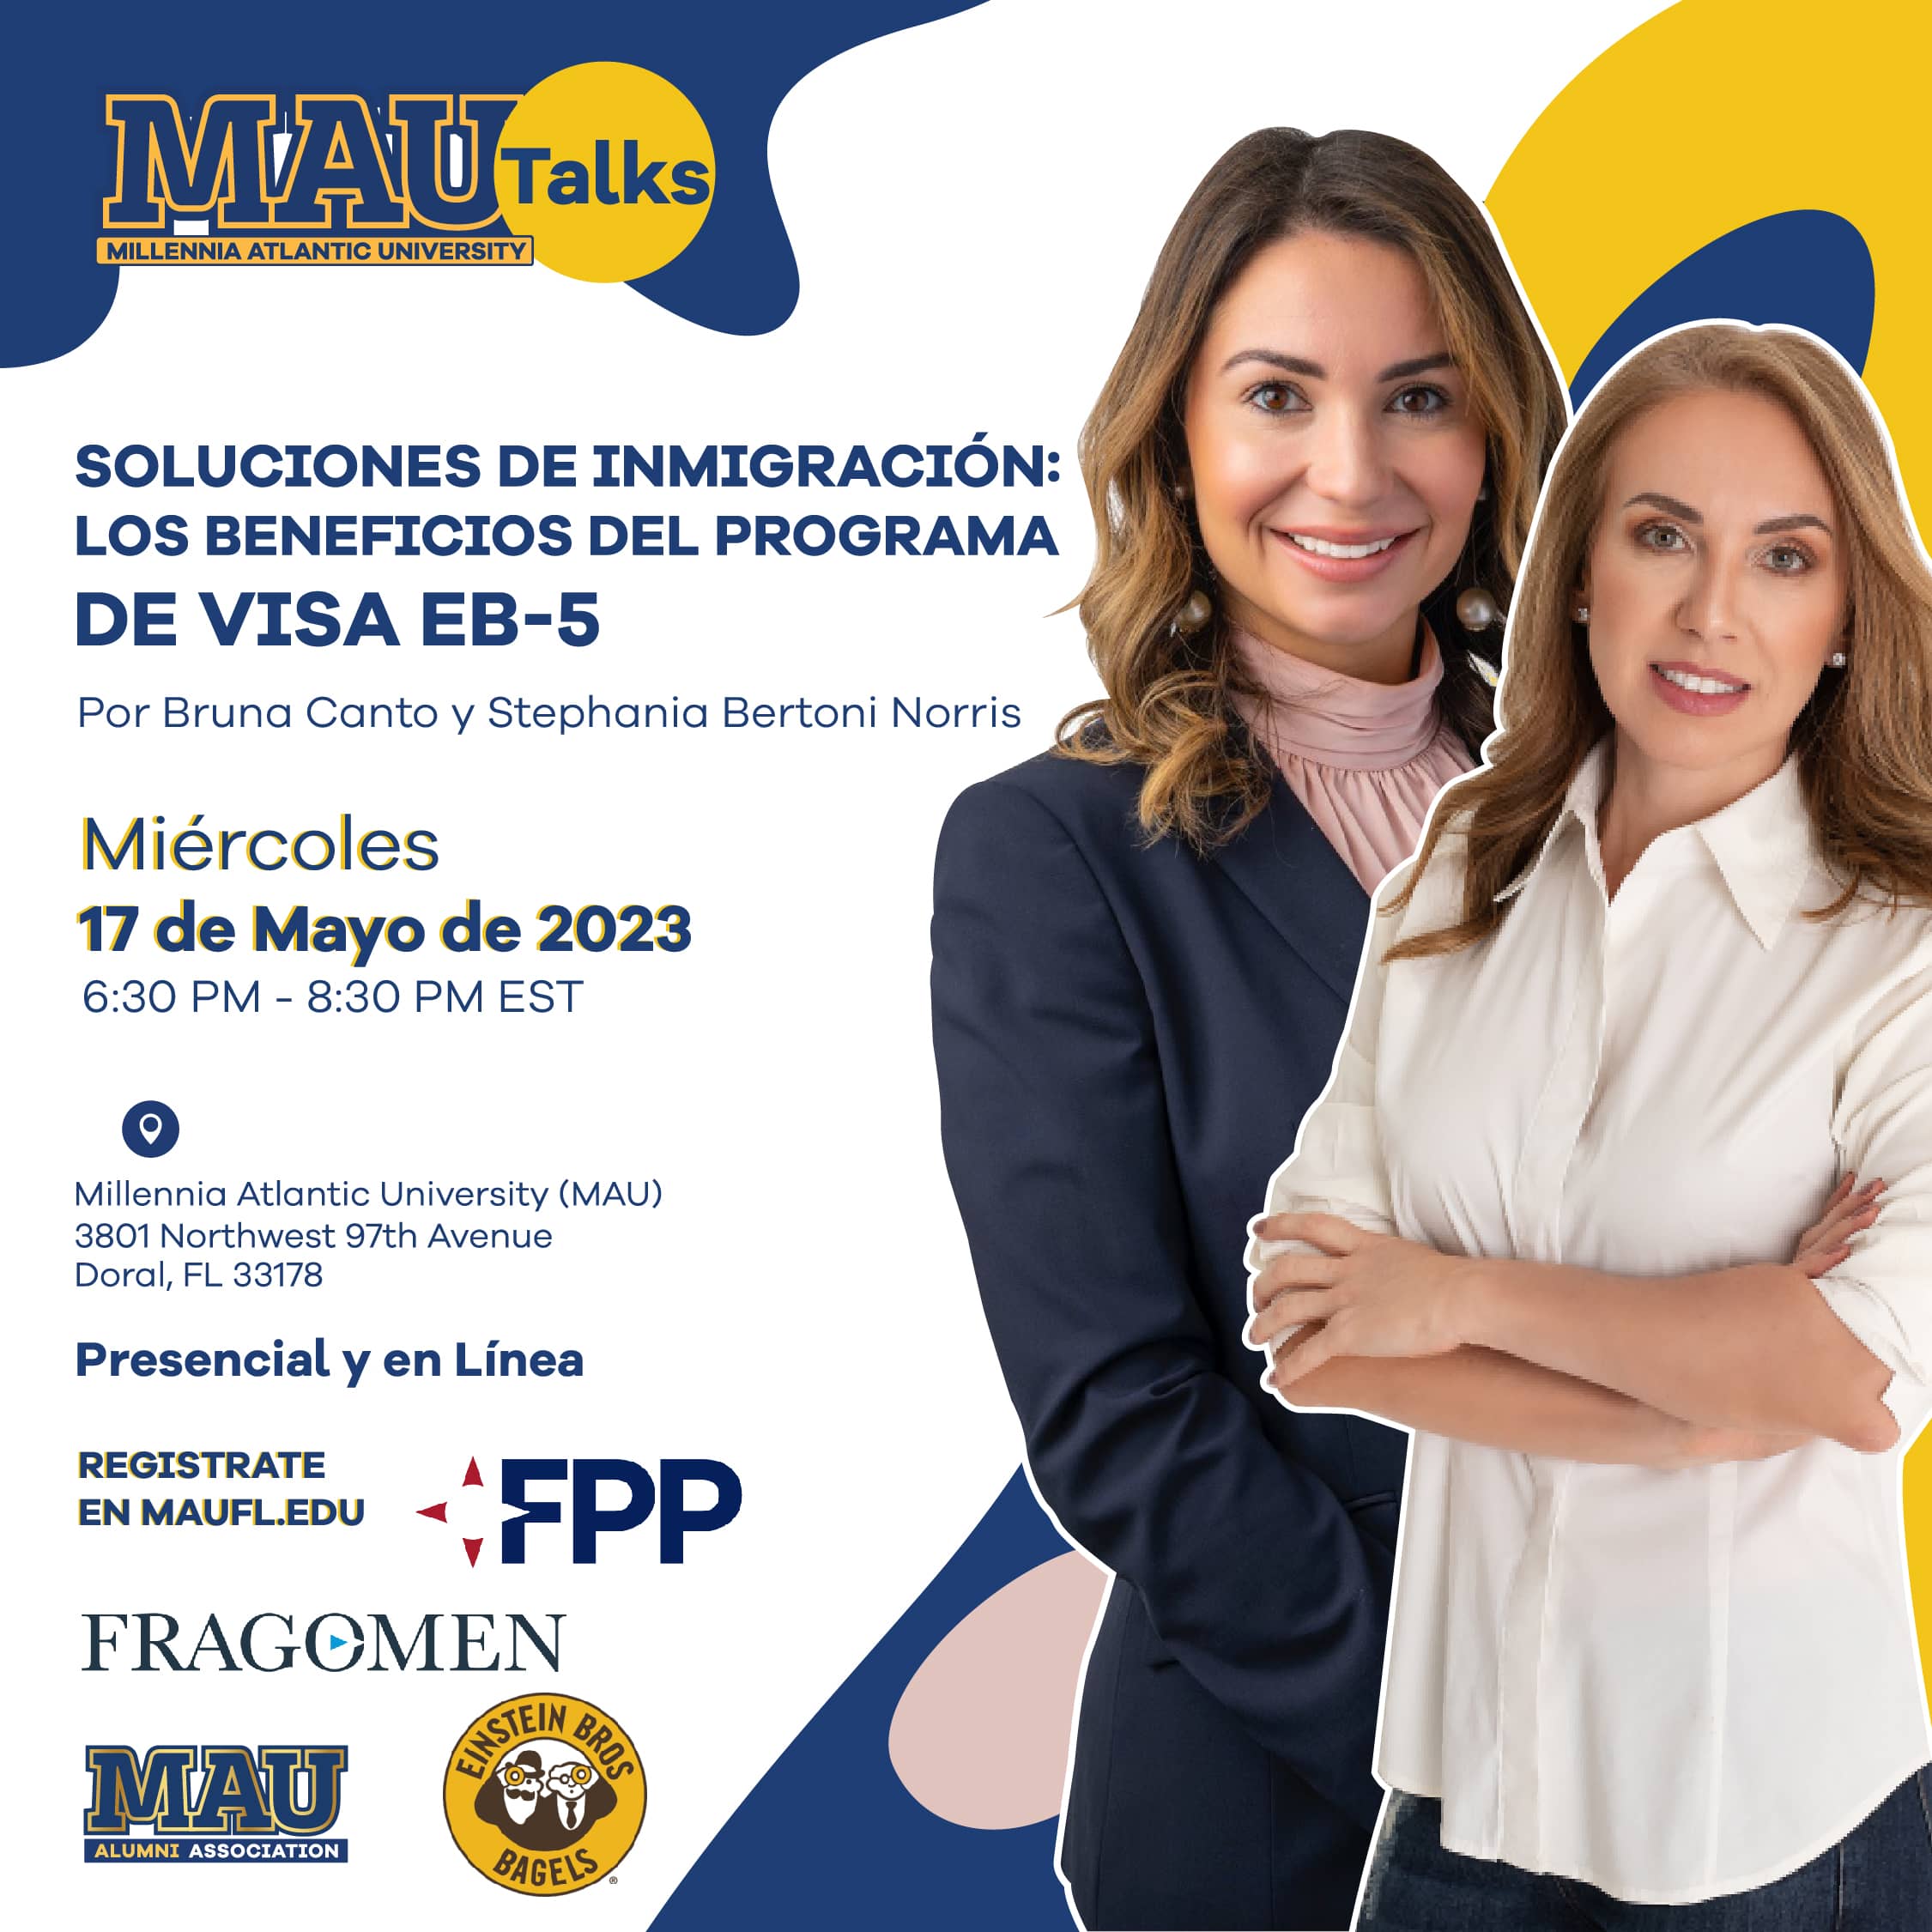 Milenia Atlantic University Mau Talks, May 17, 2023. Join us for a comprehensive exploration of the EB-5 program, an innovative investment-based immigration program that opens doors to exciting opportunities in the United States. This EB-5 event will bring together industry experts, students, and potential investors for an informative and interactive conference designed to explain the EB-5 process and showcase the potential for foreign investors to obtain permanent residency in the U.S. through job-creating investments. Our event will also provide comprehensive information to help students make informed decisions about leveraging EB-5 for their educational goals. The conference will cover a wide range of topics, including the history of FirstPathway Partners, the requirements of the EB-5 visa program, how students can transition from a student visa to an EB-5 visa, and FPP’s new investment opportunity TALUS. This EB-5-centered conference will also allow students a unique opportunity to connect with Bruna directly in order to help them gain valuable insights on any questions that they may have.